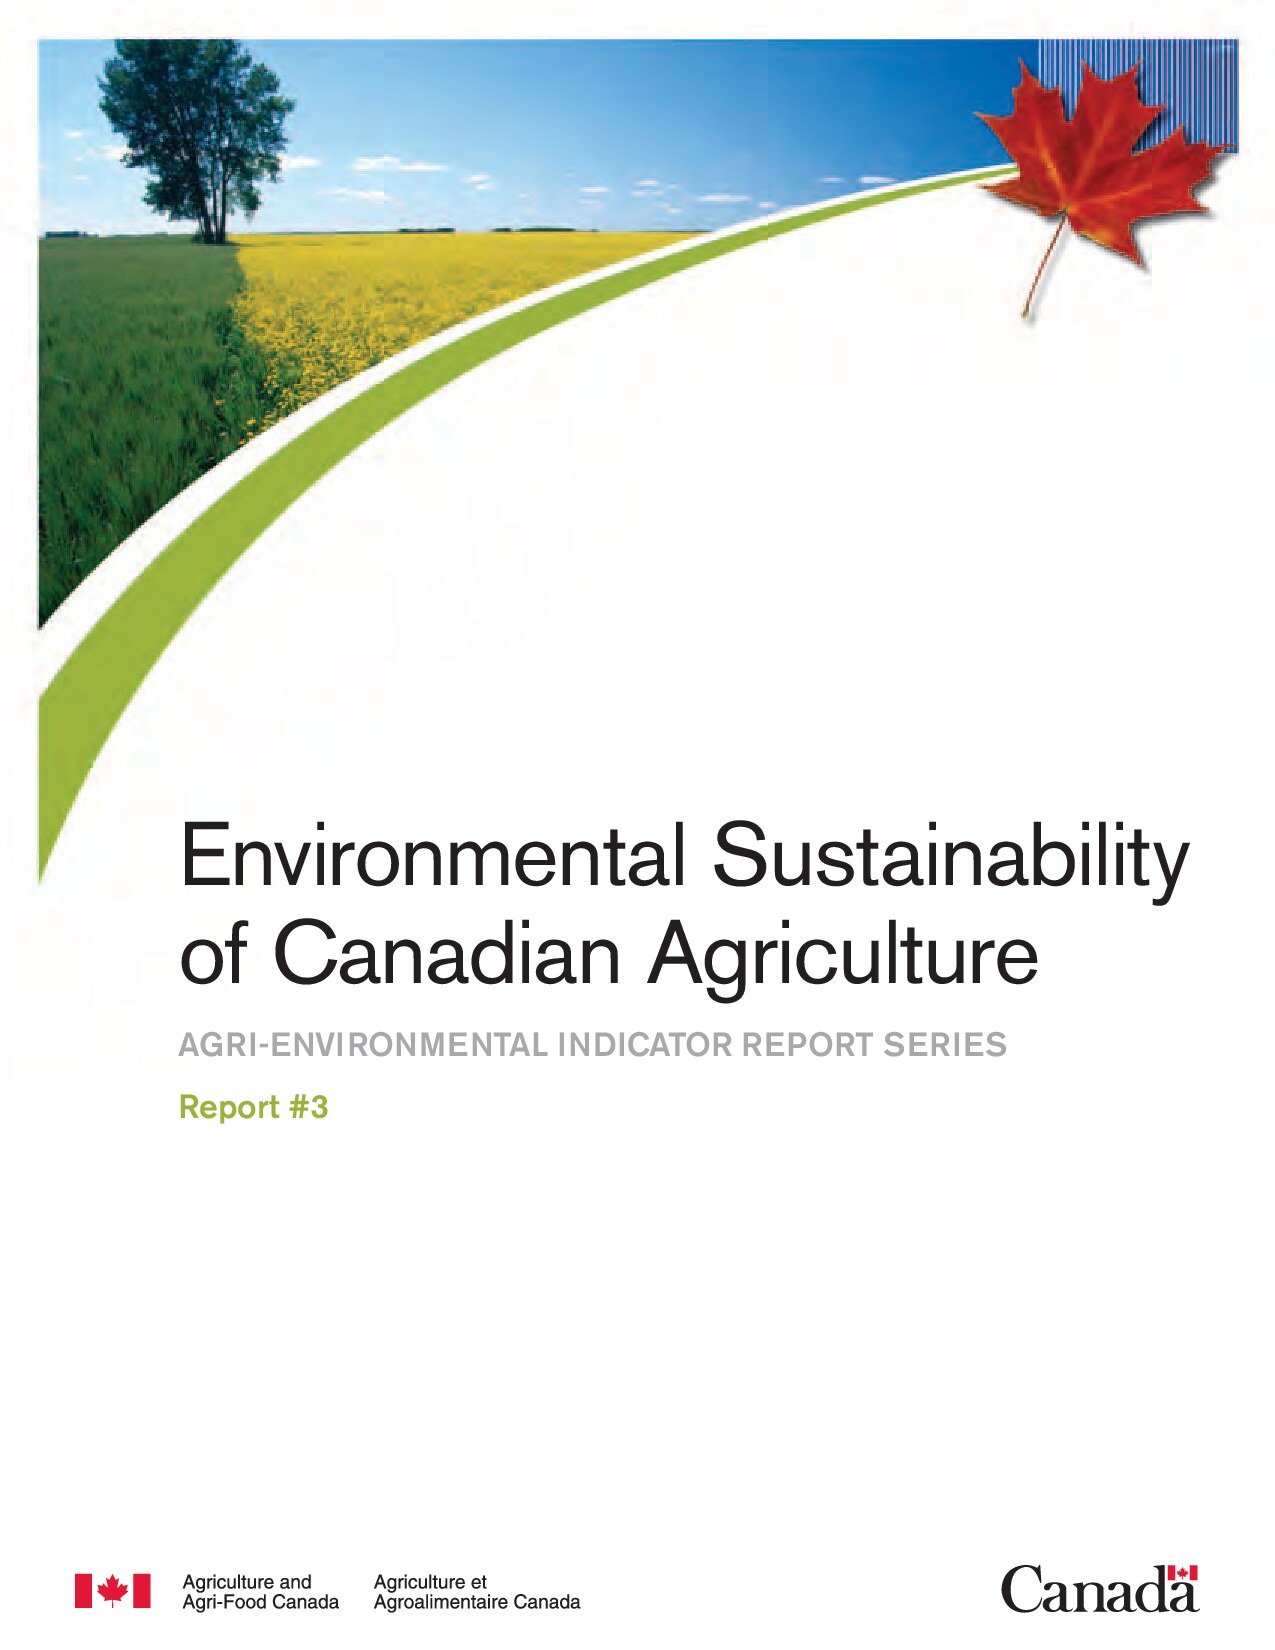 Environmental Sustainability of Canadian Agriculture ( PDFDrive.com )